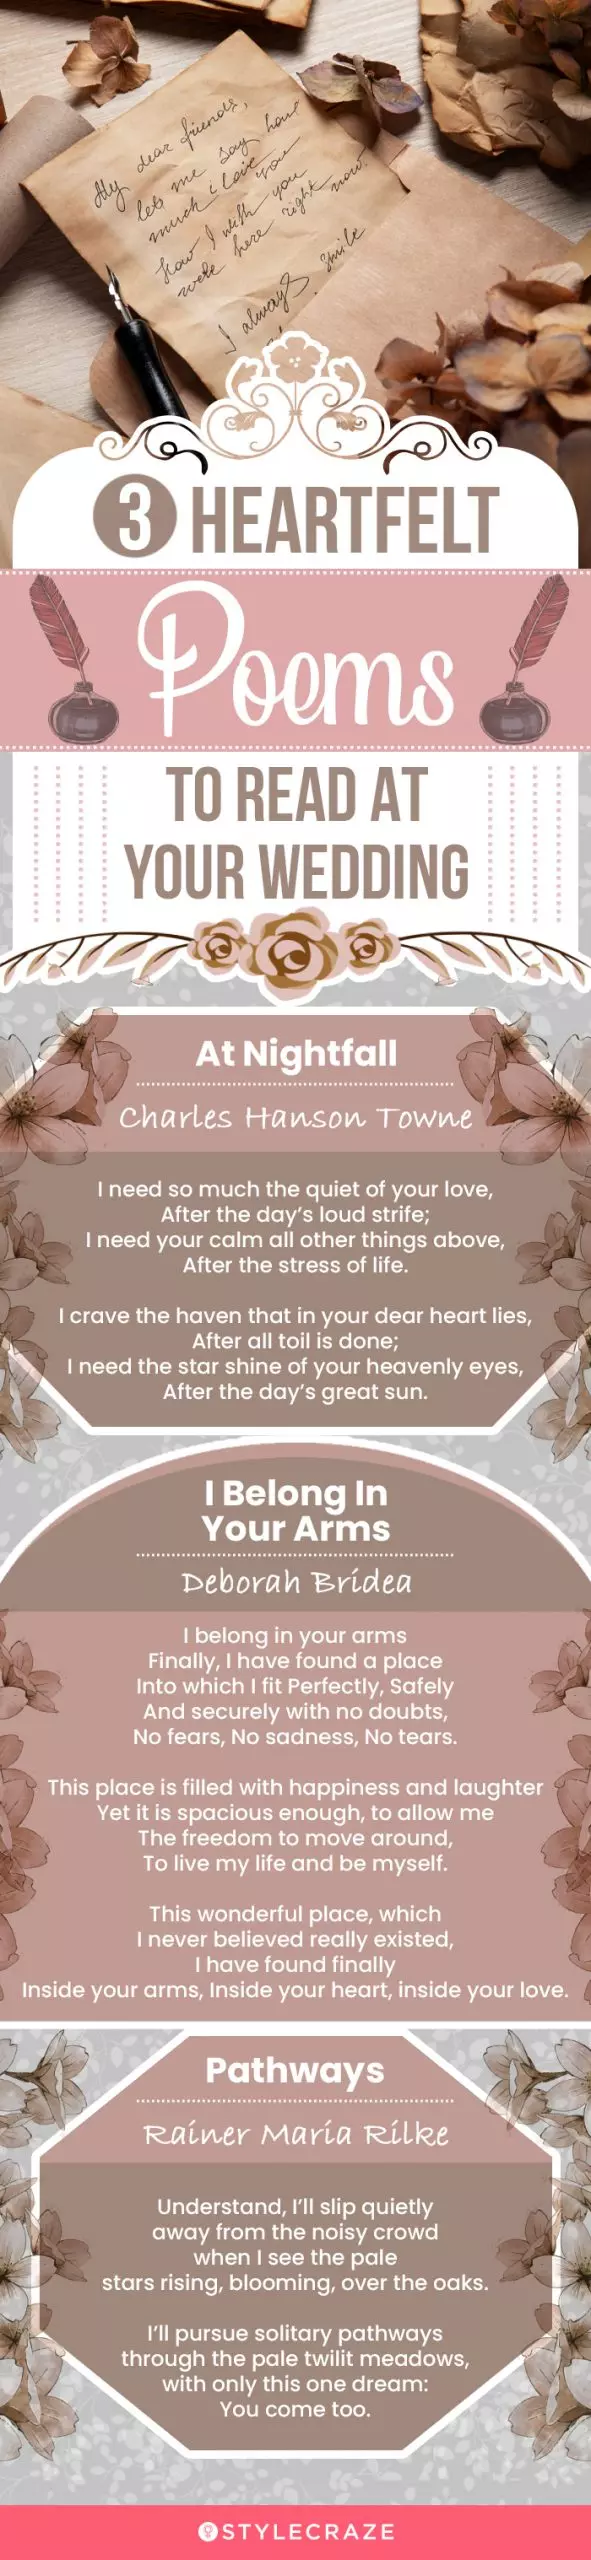 3 heartfelt wedding poems to read at your marriage ceremony (infographic)